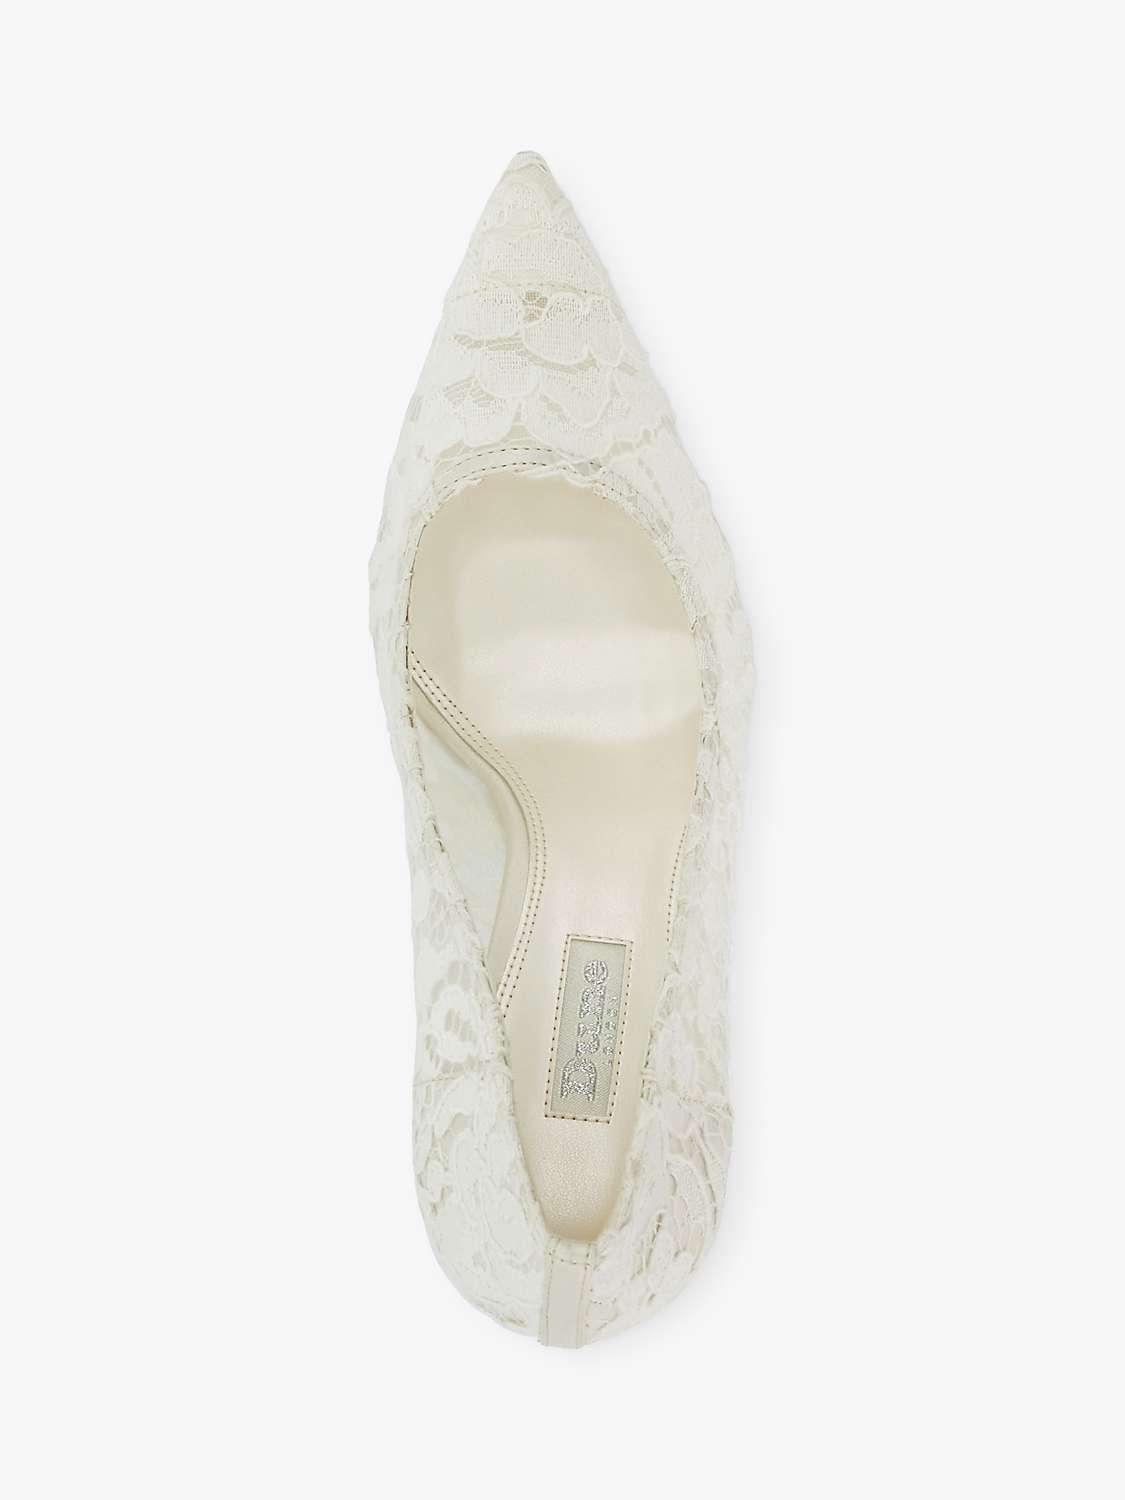 Buy Dune Bridal Collection Adoring Lace Stiletto Court Shoes, Ivory Online at johnlewis.com